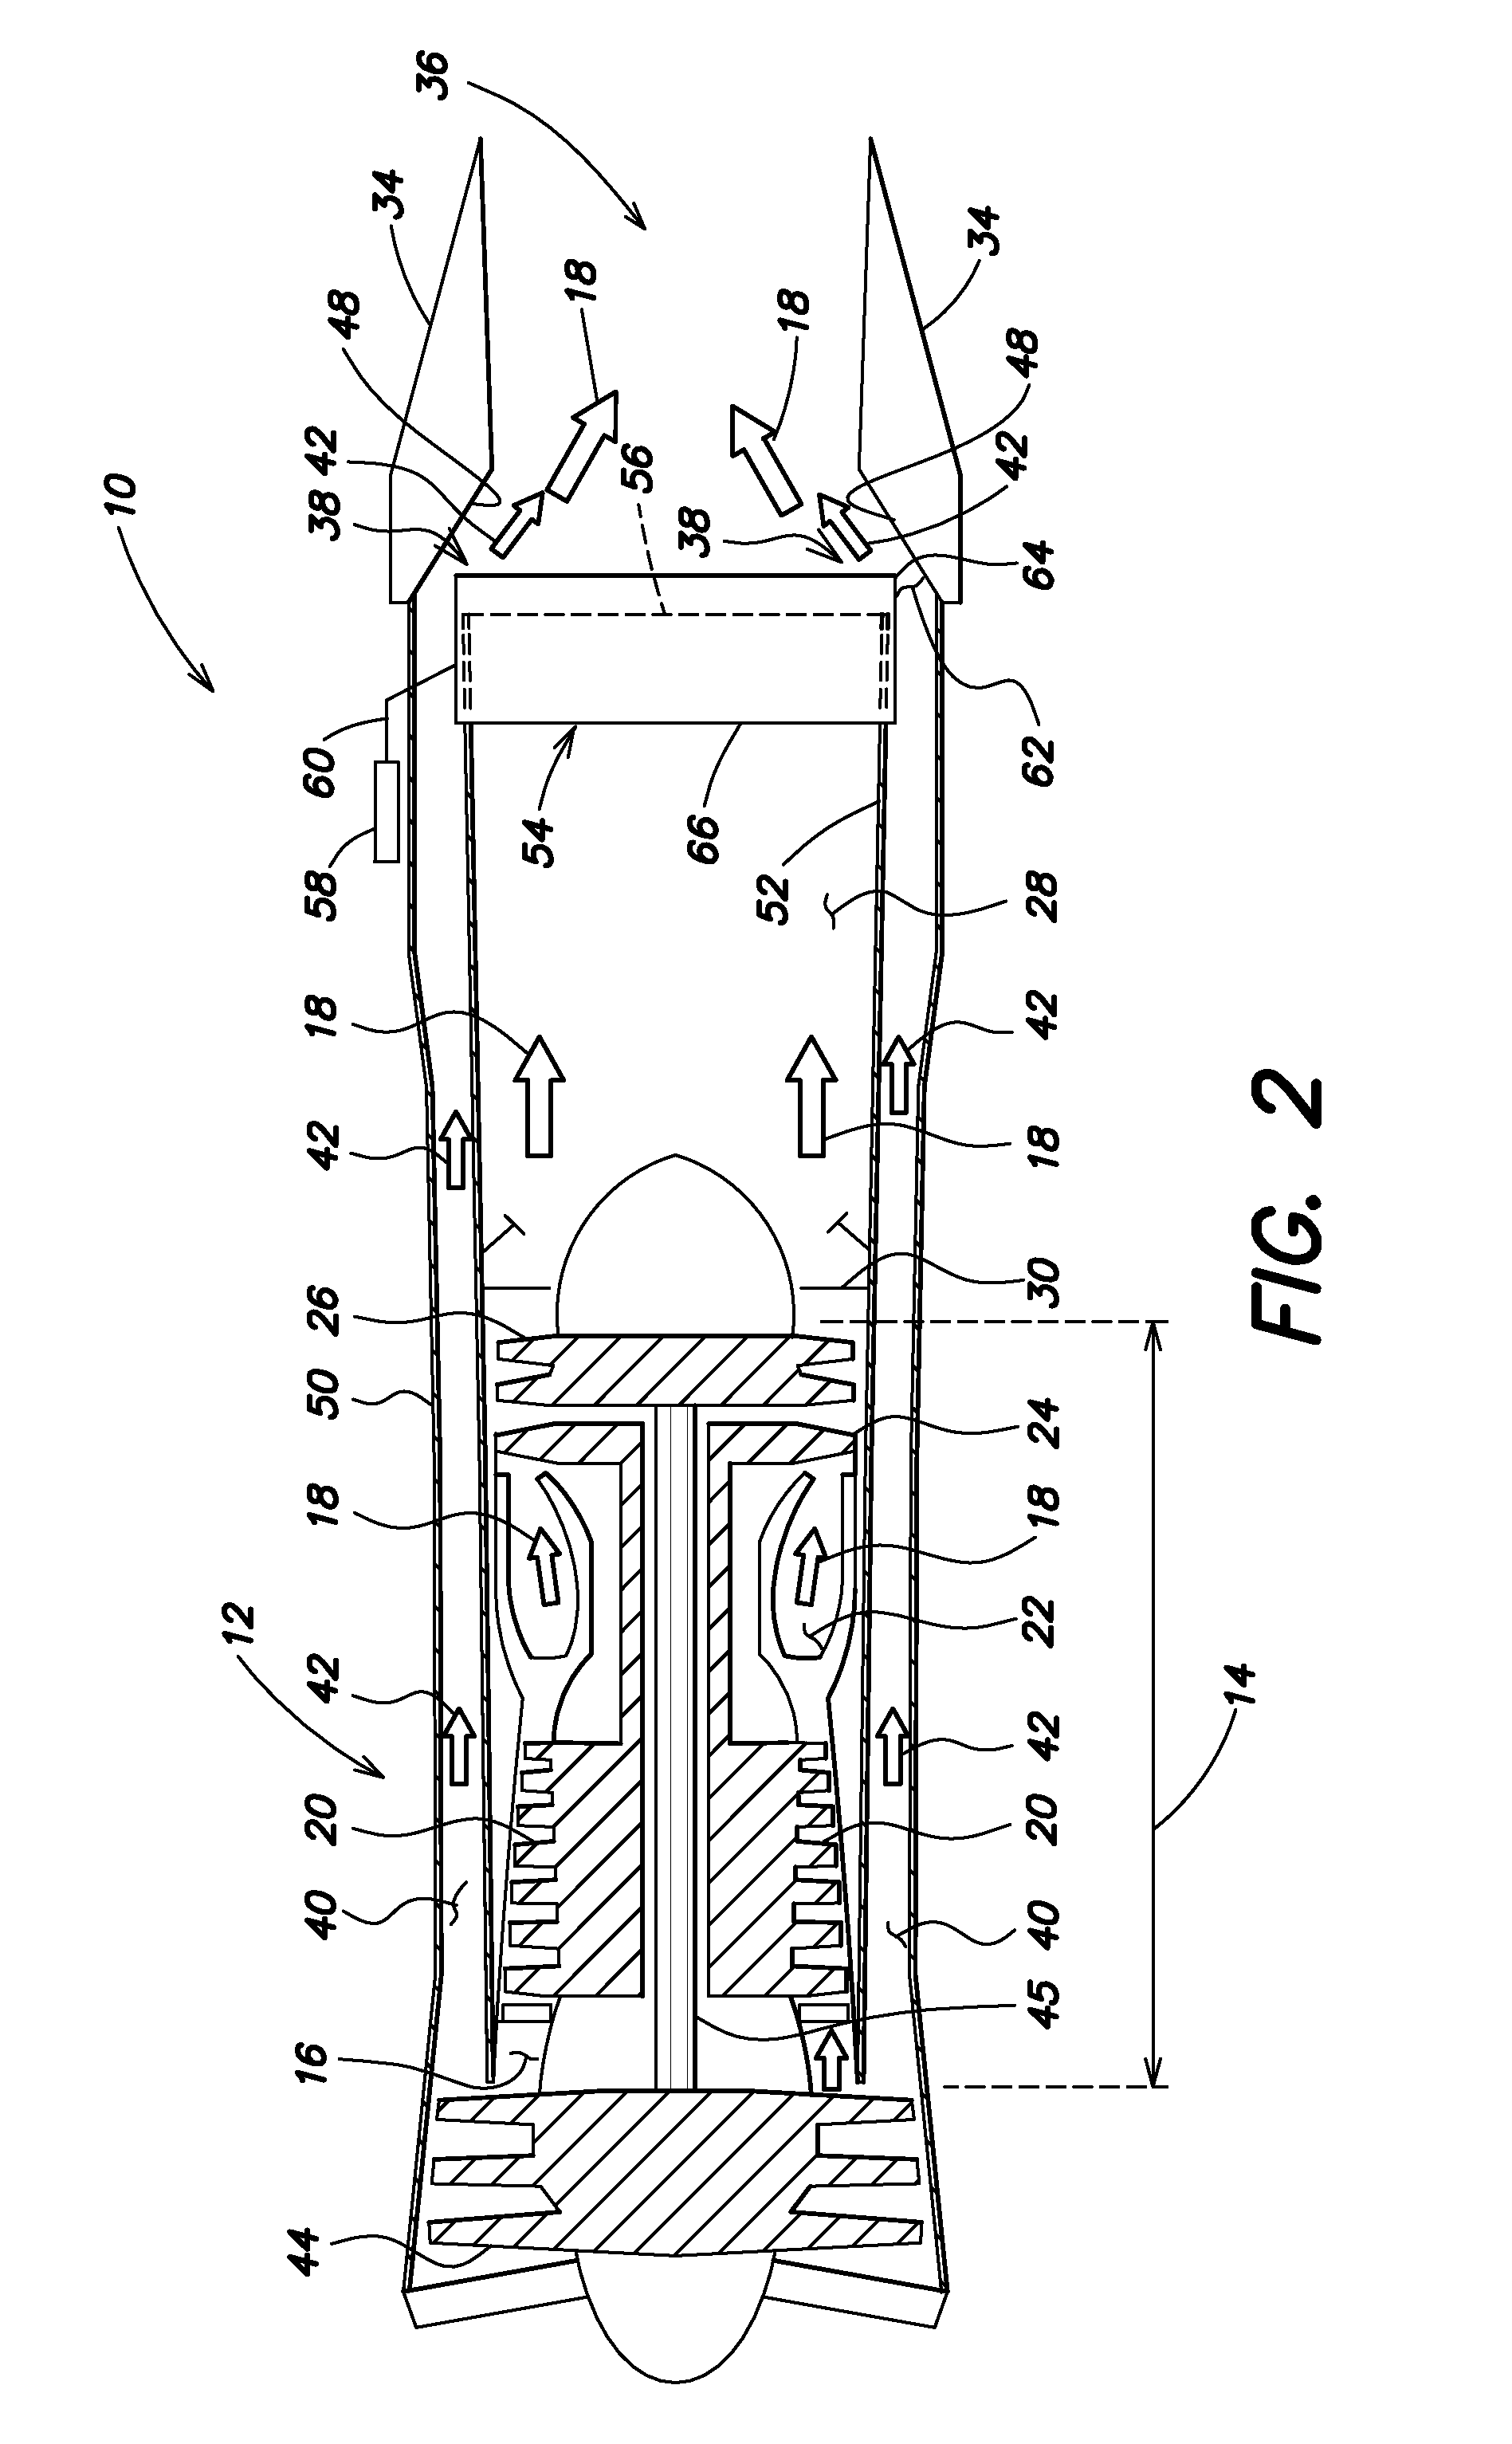 Gas Turbine Engine System for Modulating Flow of Fan By-Pass Air and Core Engine Air